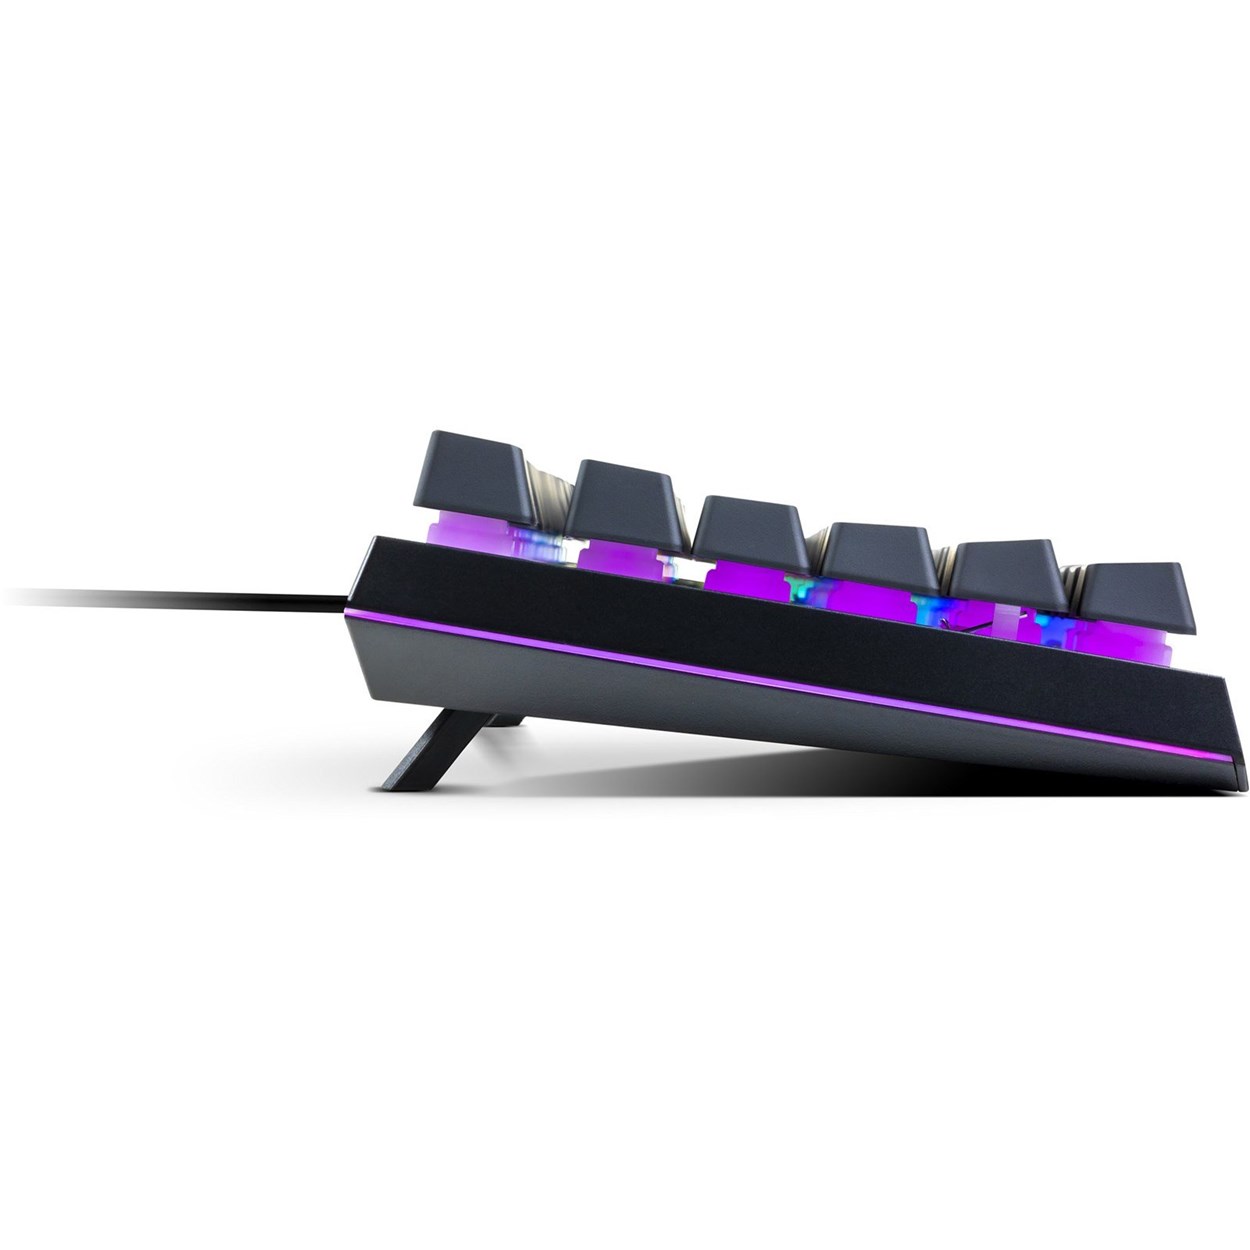 Stocking Filler Gifts 2021 - MS110 RGB keyboard and Mouse